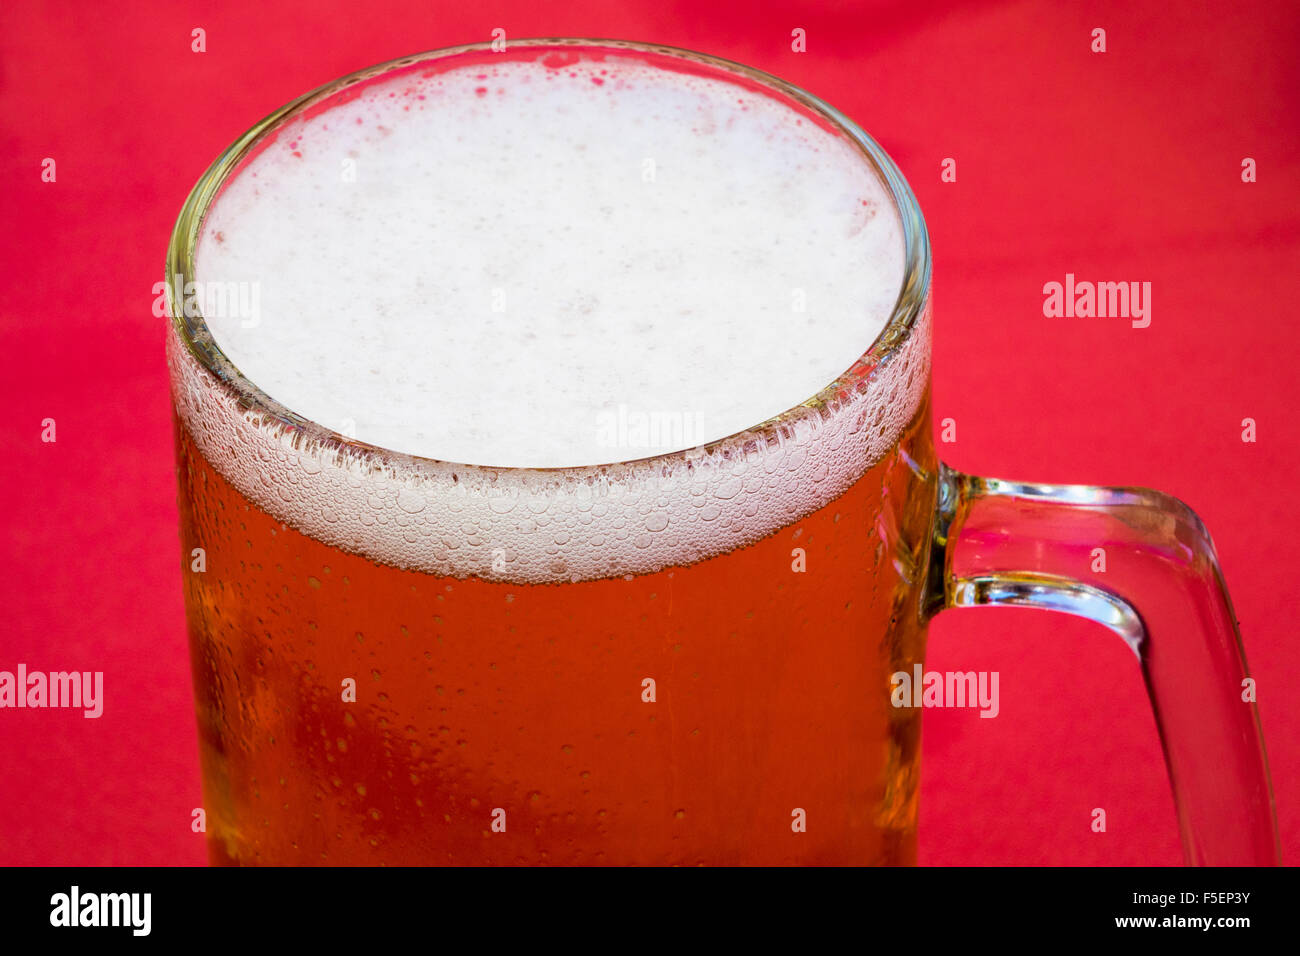 Beer in a glass tankard Stock Photo